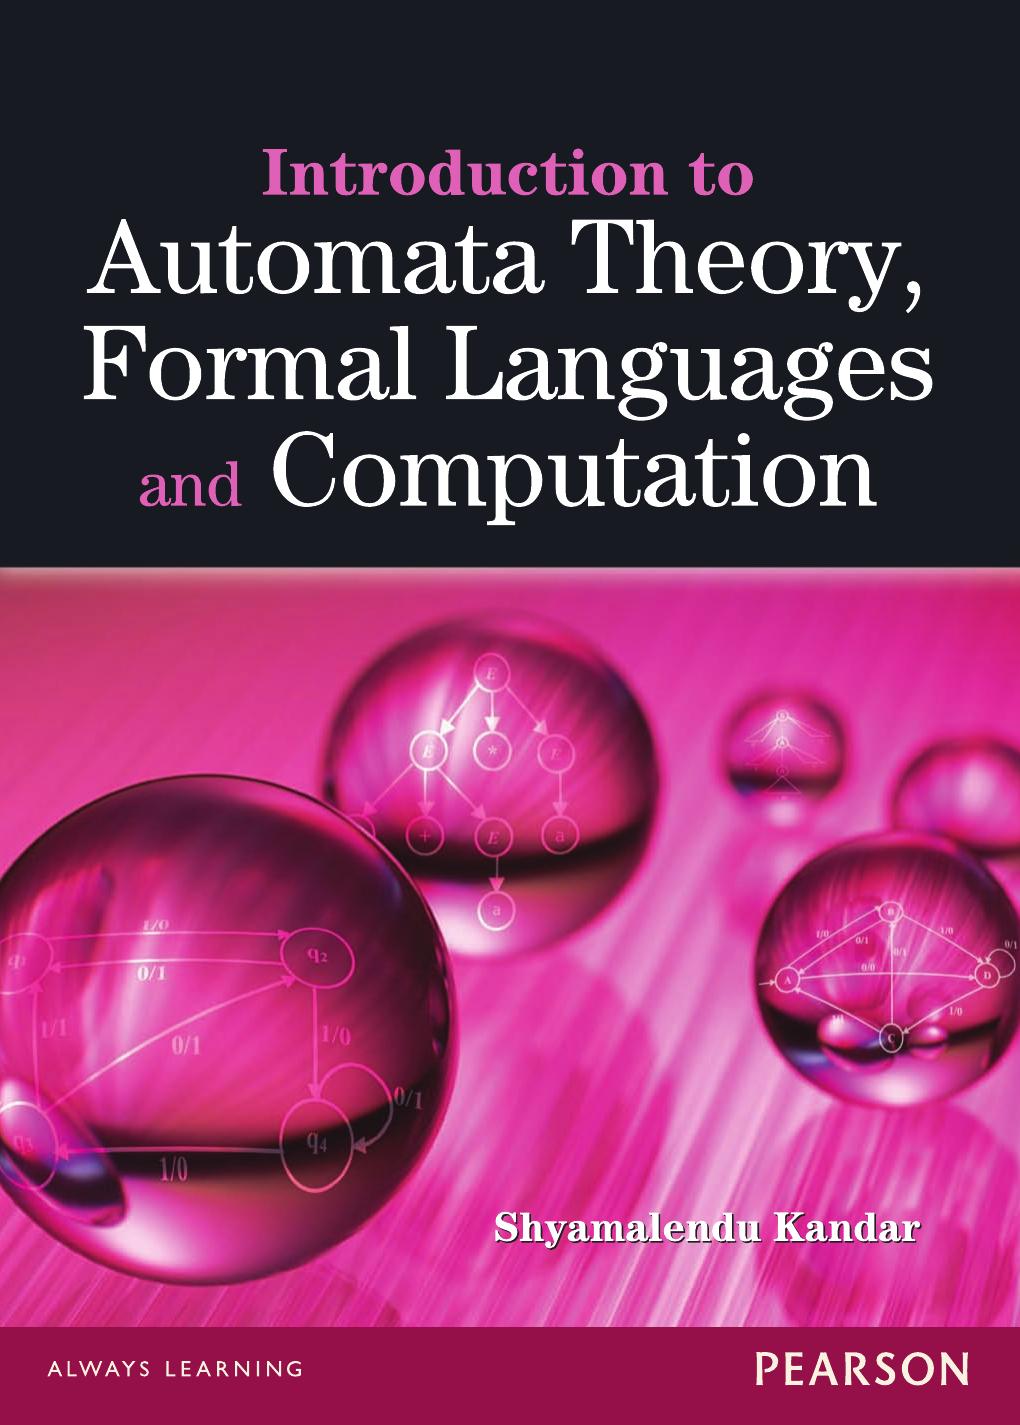 Introduction to Automata Theory, Formal Languages and Computation